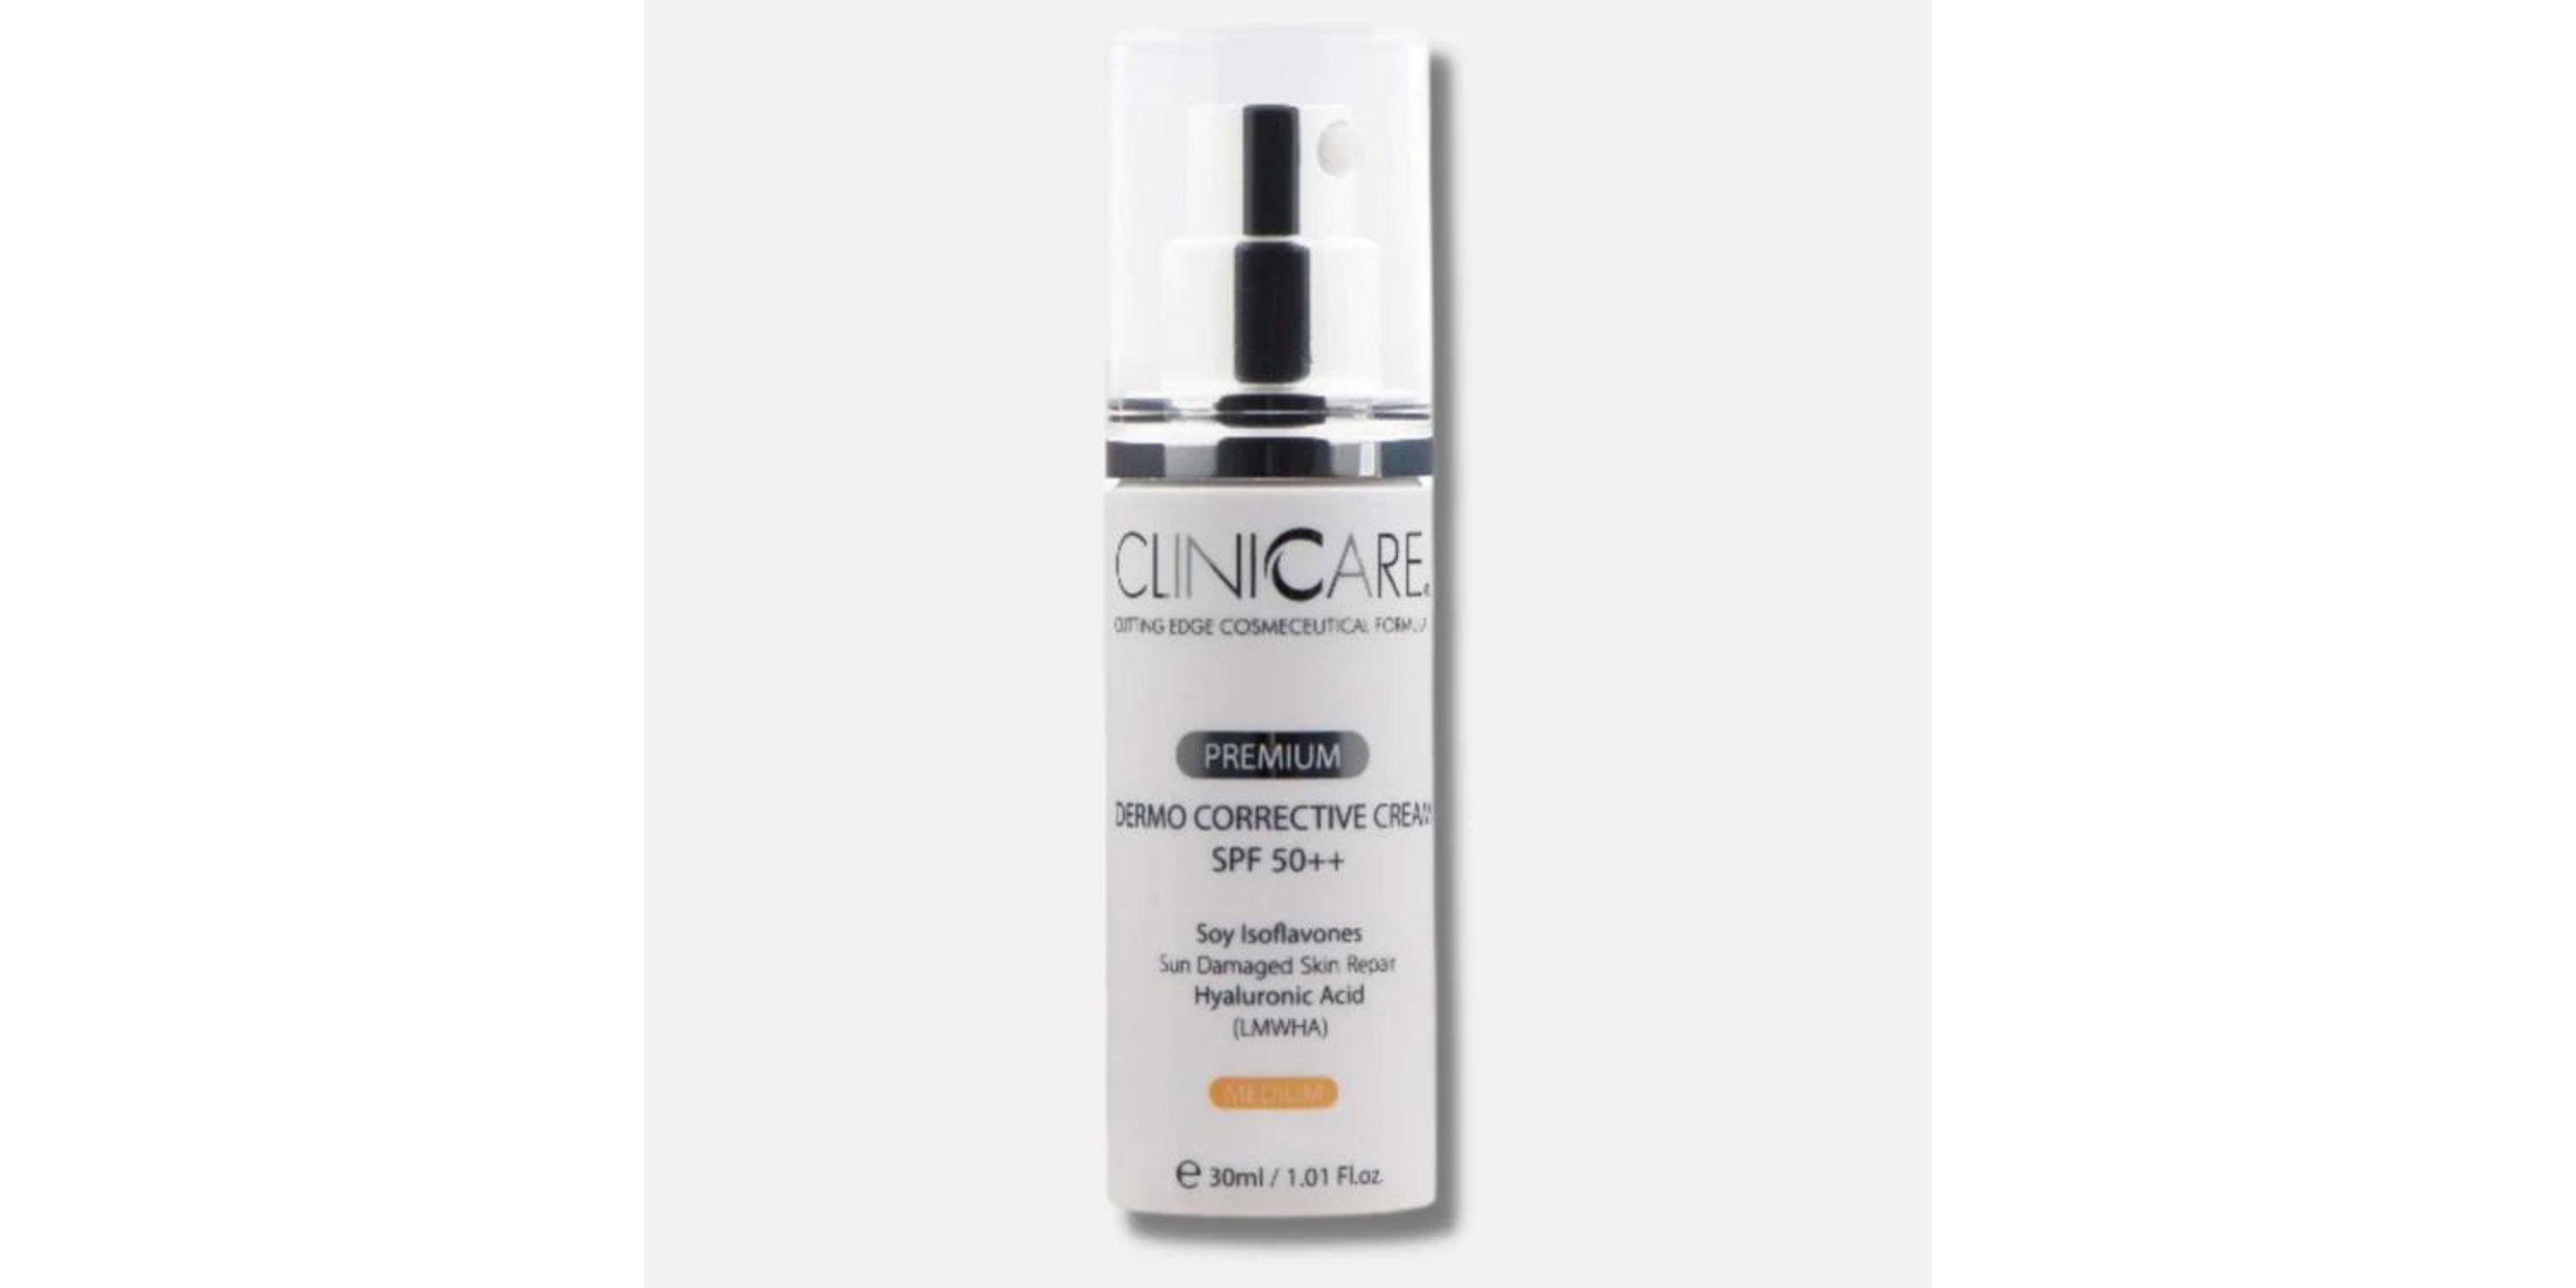 The Pros and Cons of the CLINICCARE Dermo Corrective Cream SPF50 30ml